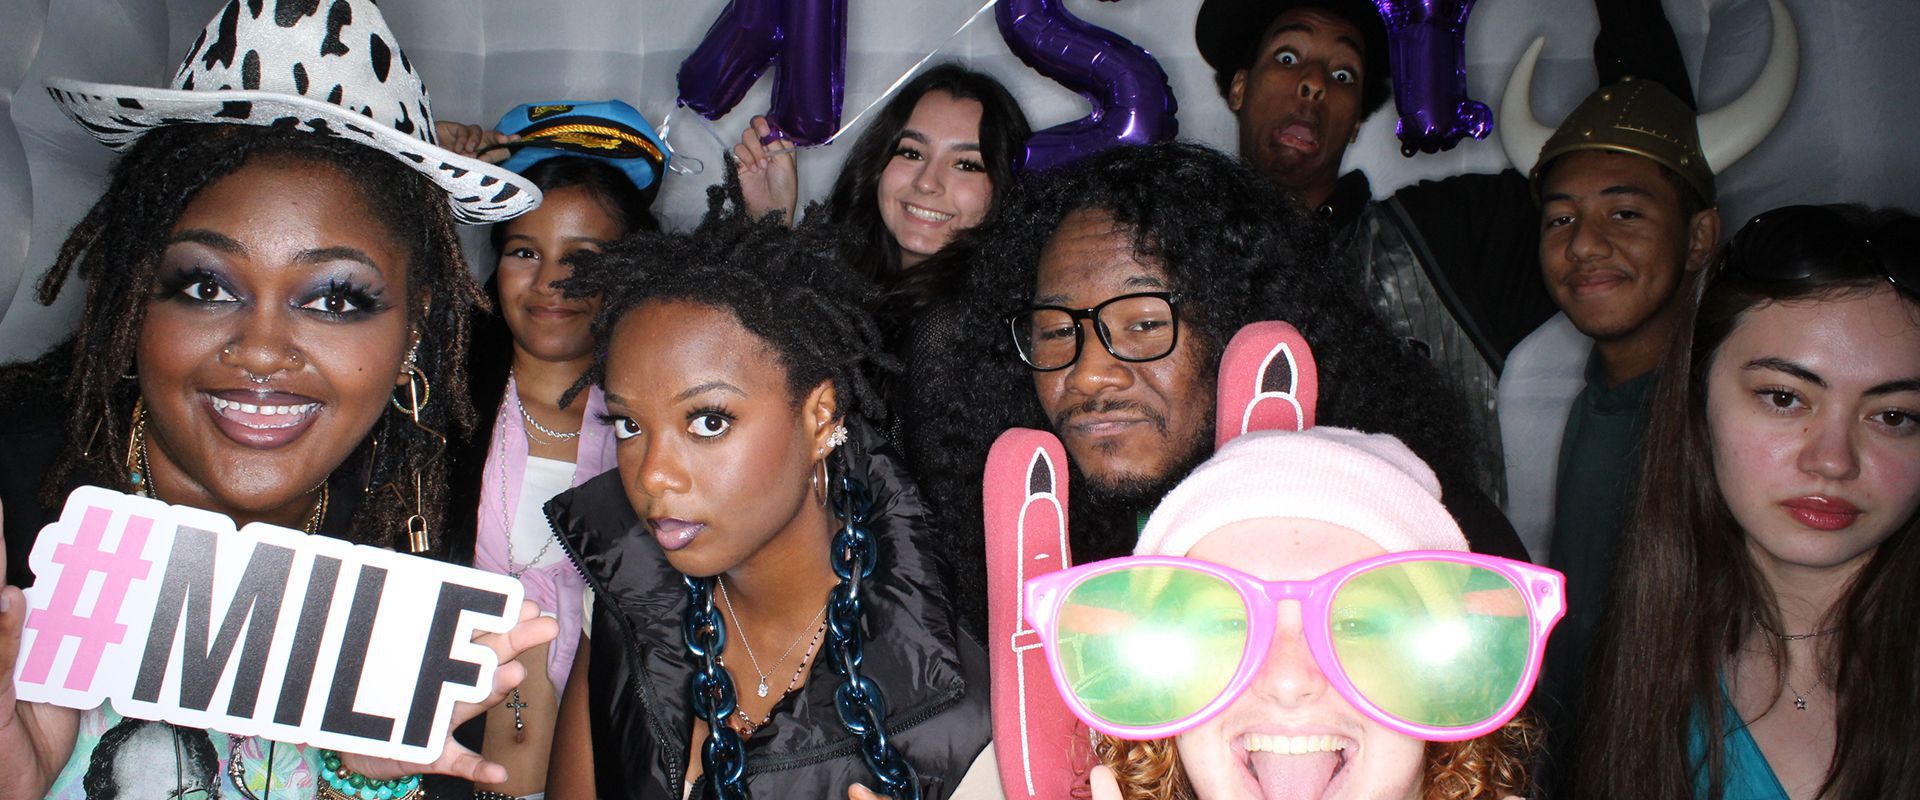 Students in a photobooth